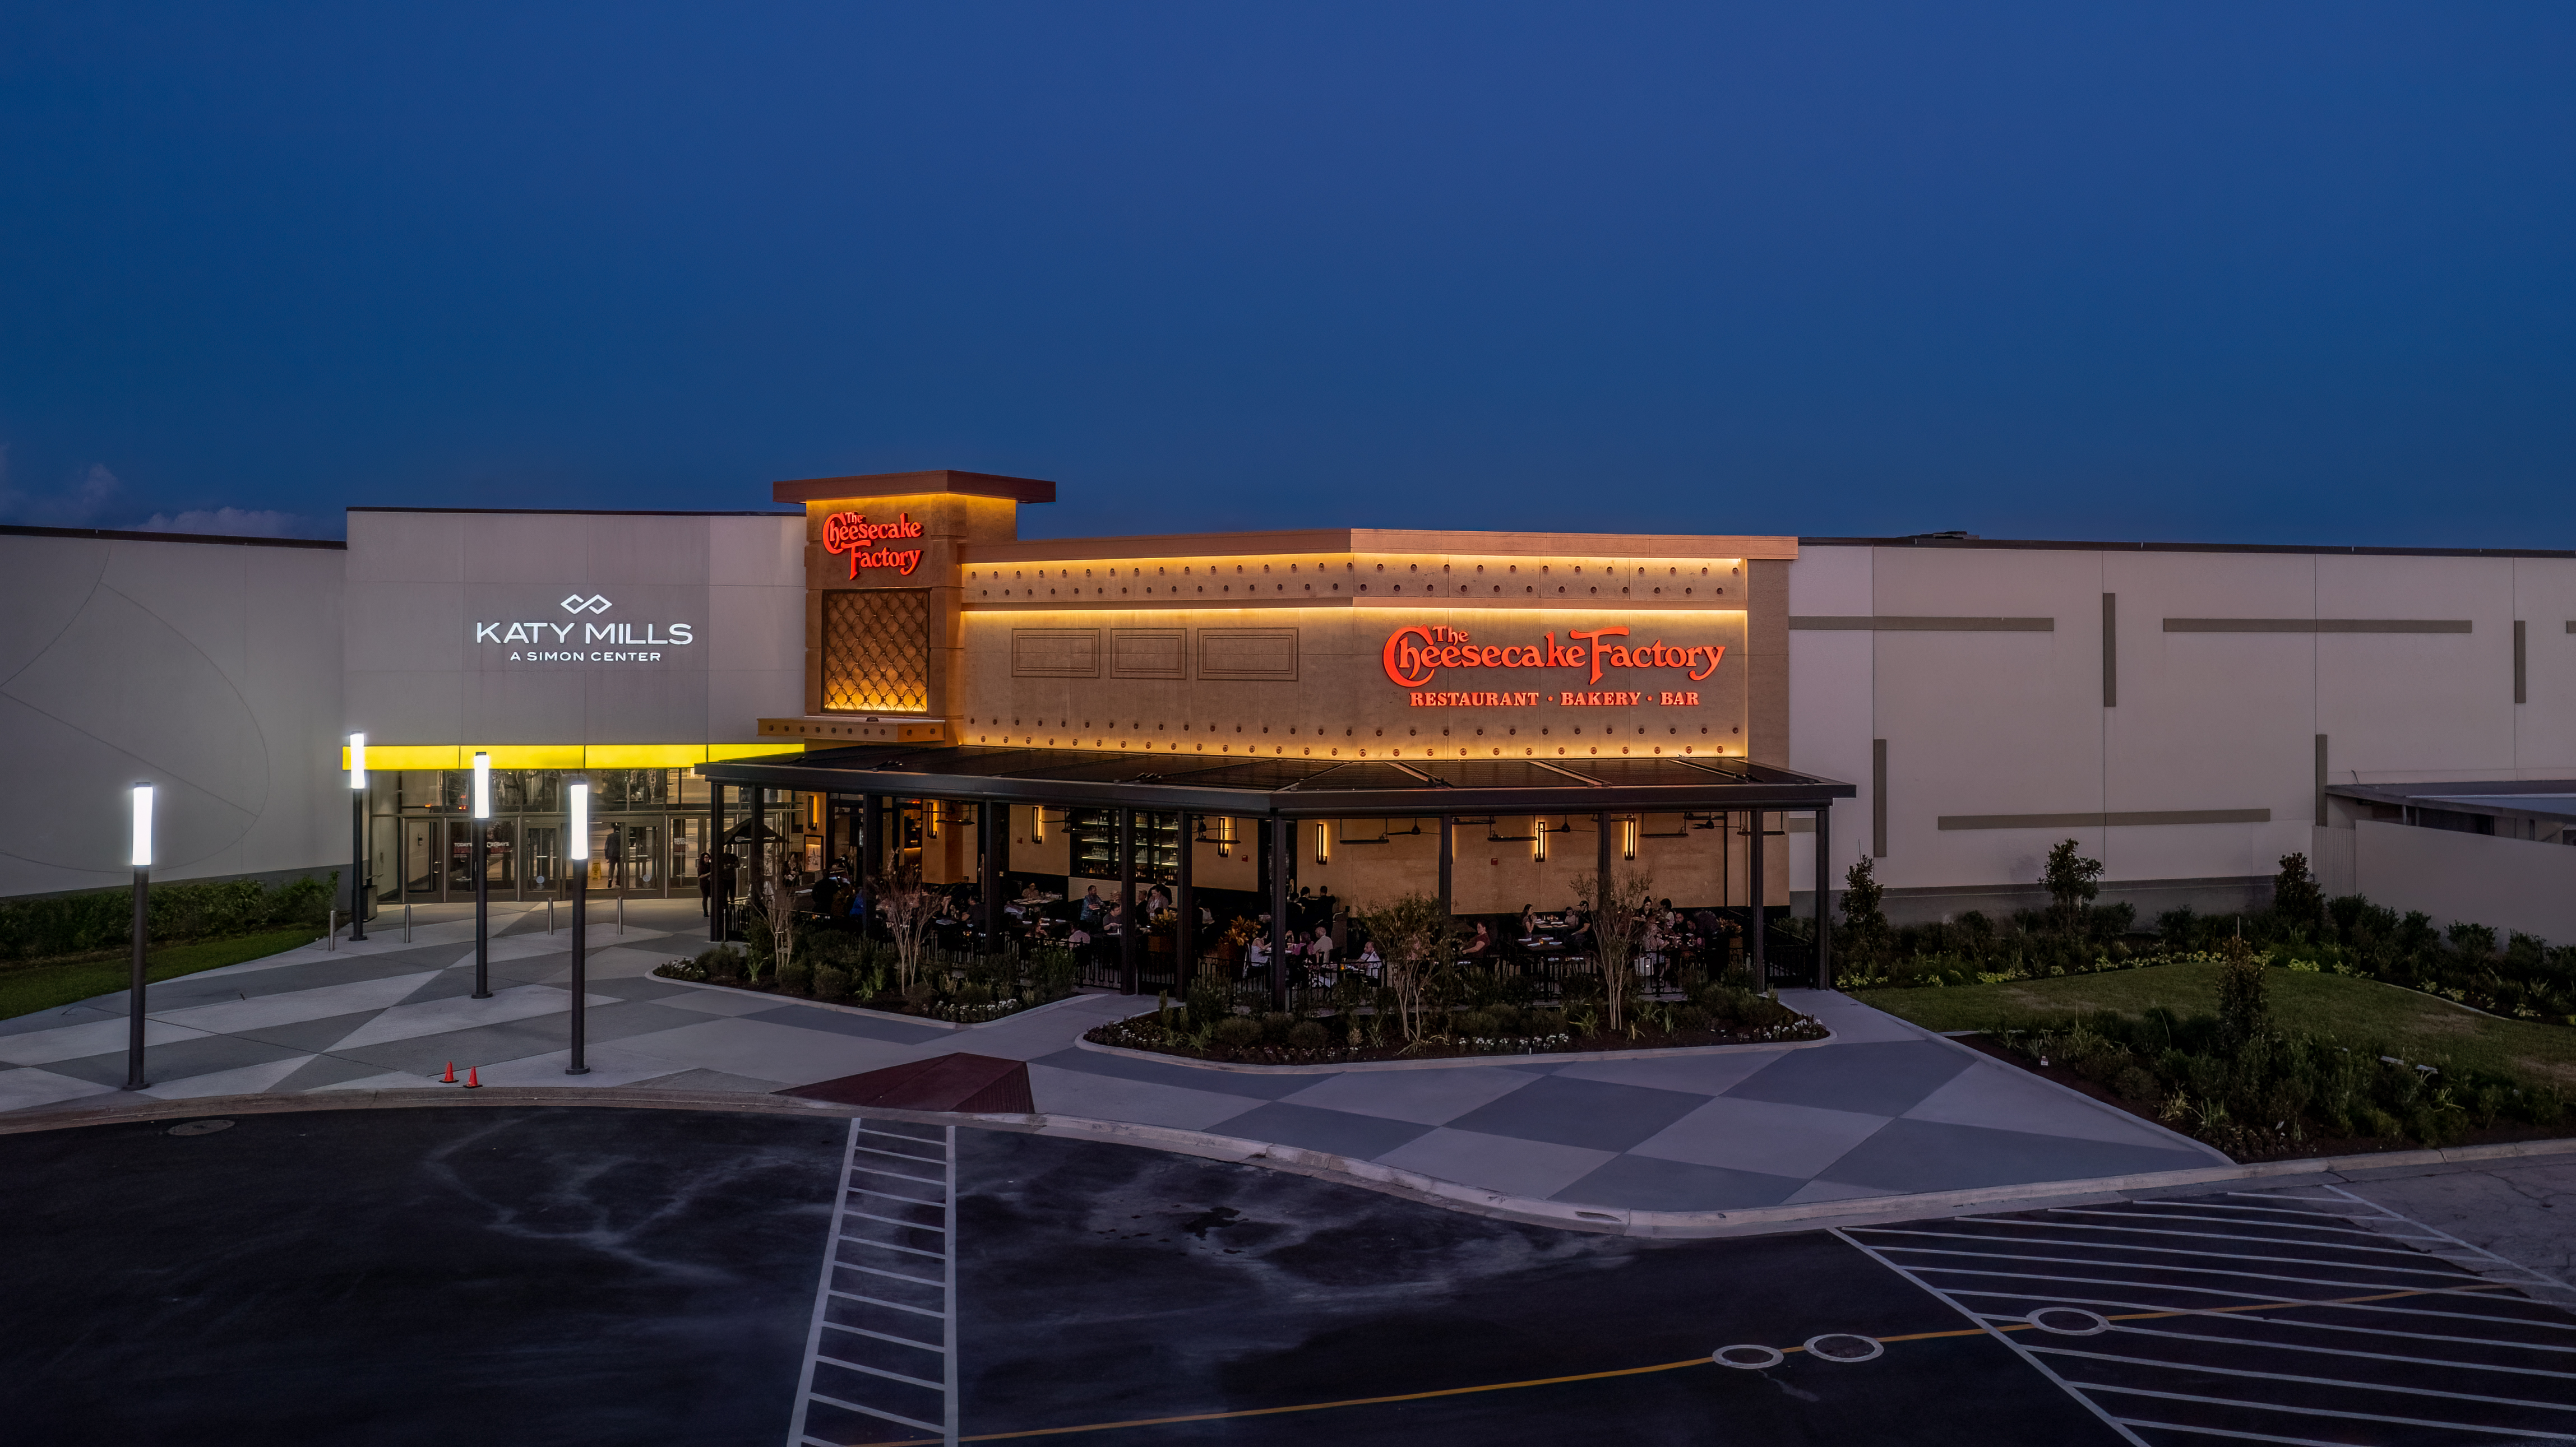 The Cheesecake Factory location in Katy Mills store image five